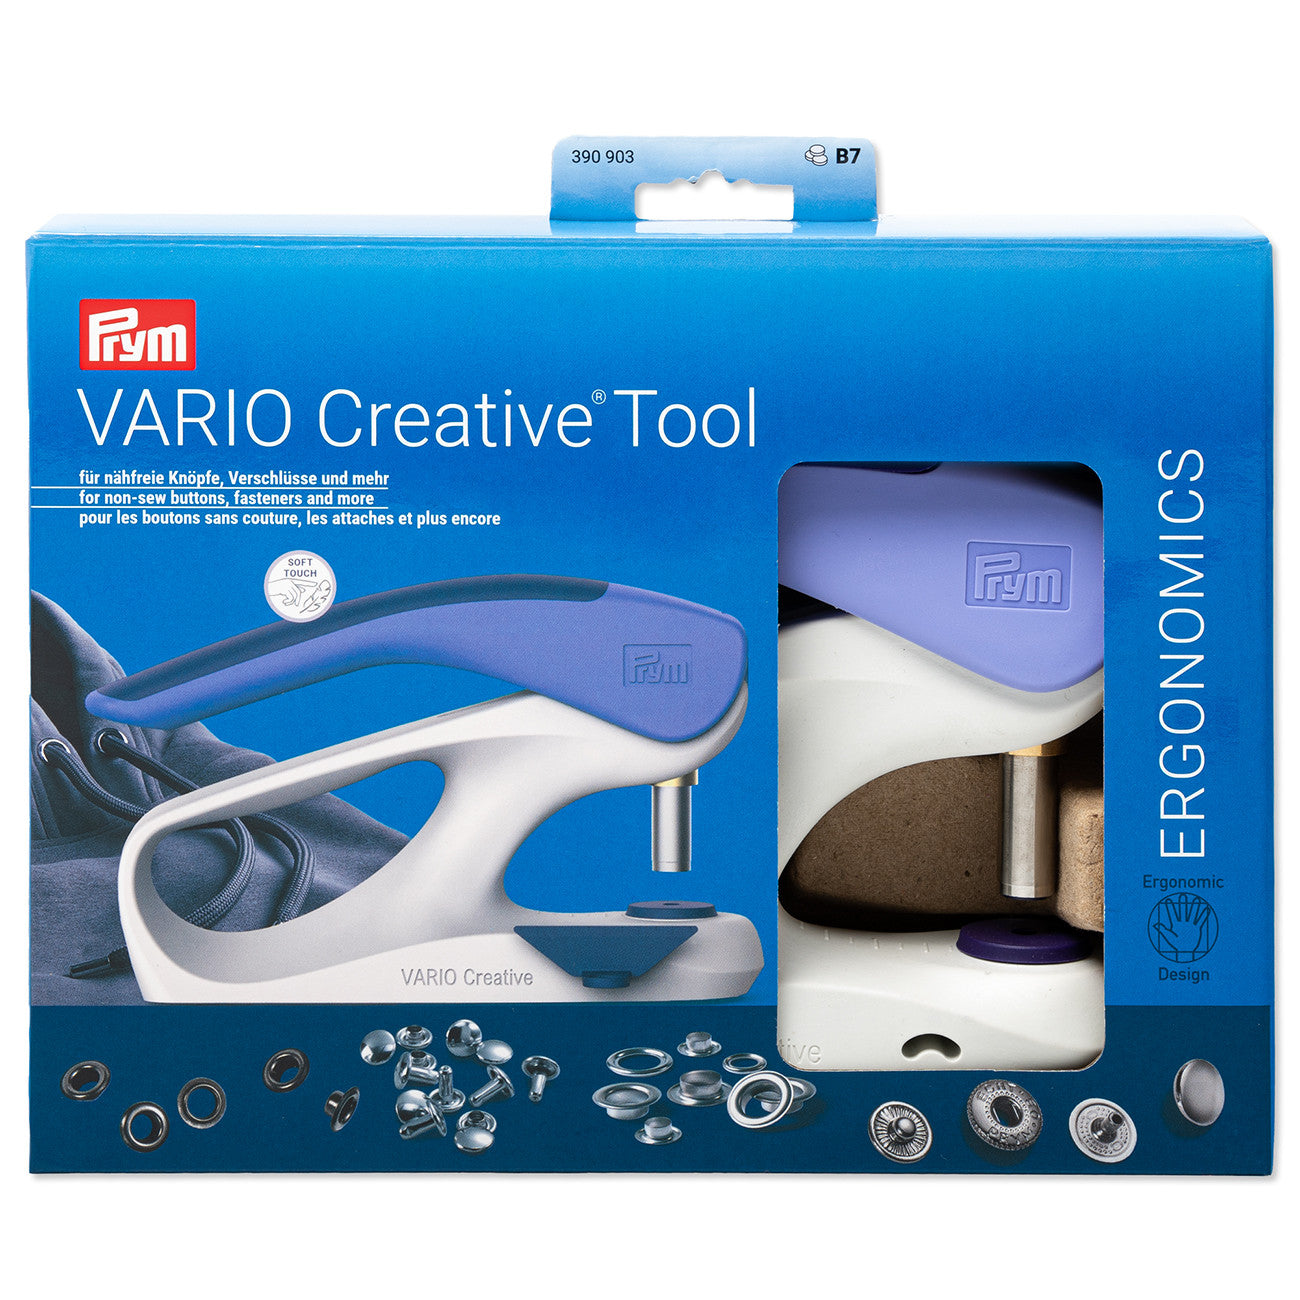 Prym Vario Creative Ergonomic Crafting Tool for Punched Holes, Snaps, Eyelets, and Rivets